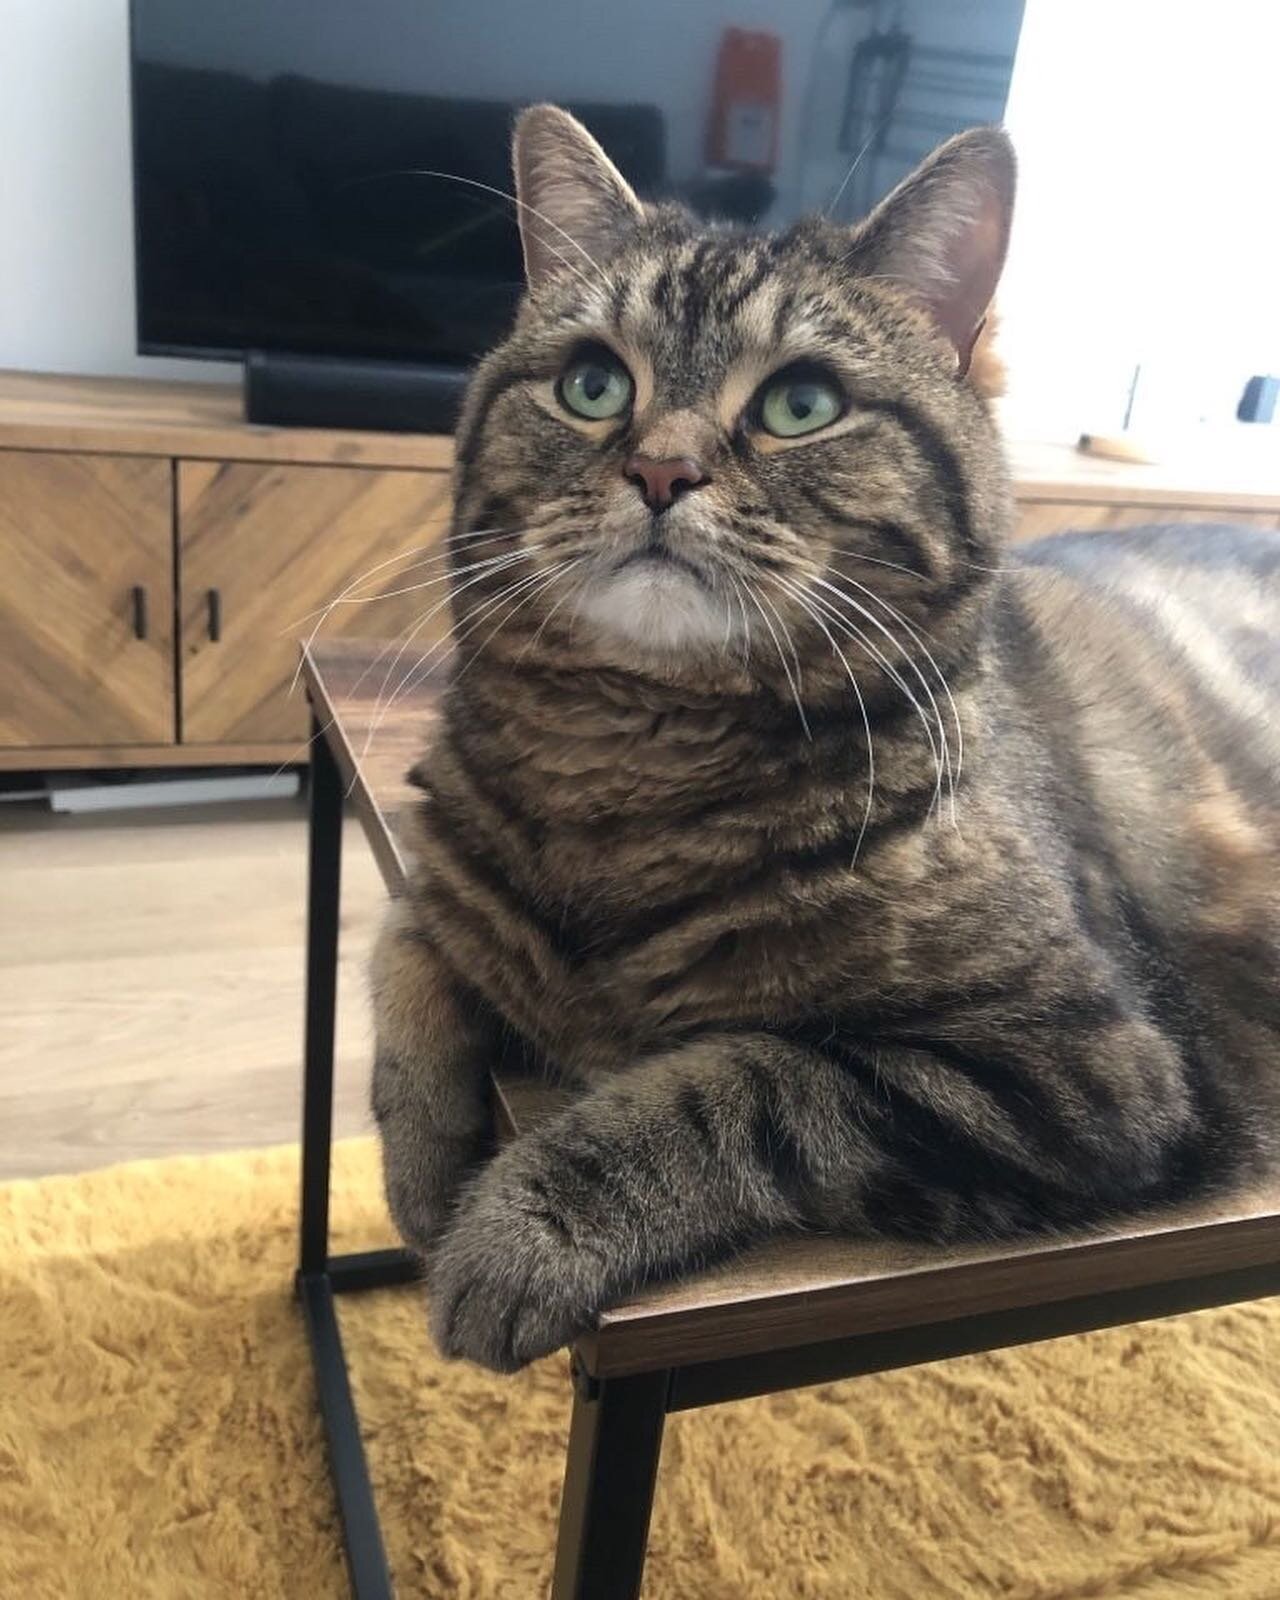 Maru - the sweetest little boy 😍 made a very special bond with our @charsaunders last week! ❤️

#catsofinstagram #catoftheday #cambridge #catstagram #cambridgeshire #petsitter #catsitter #petsofinstagram #petlover #cambridgeuk